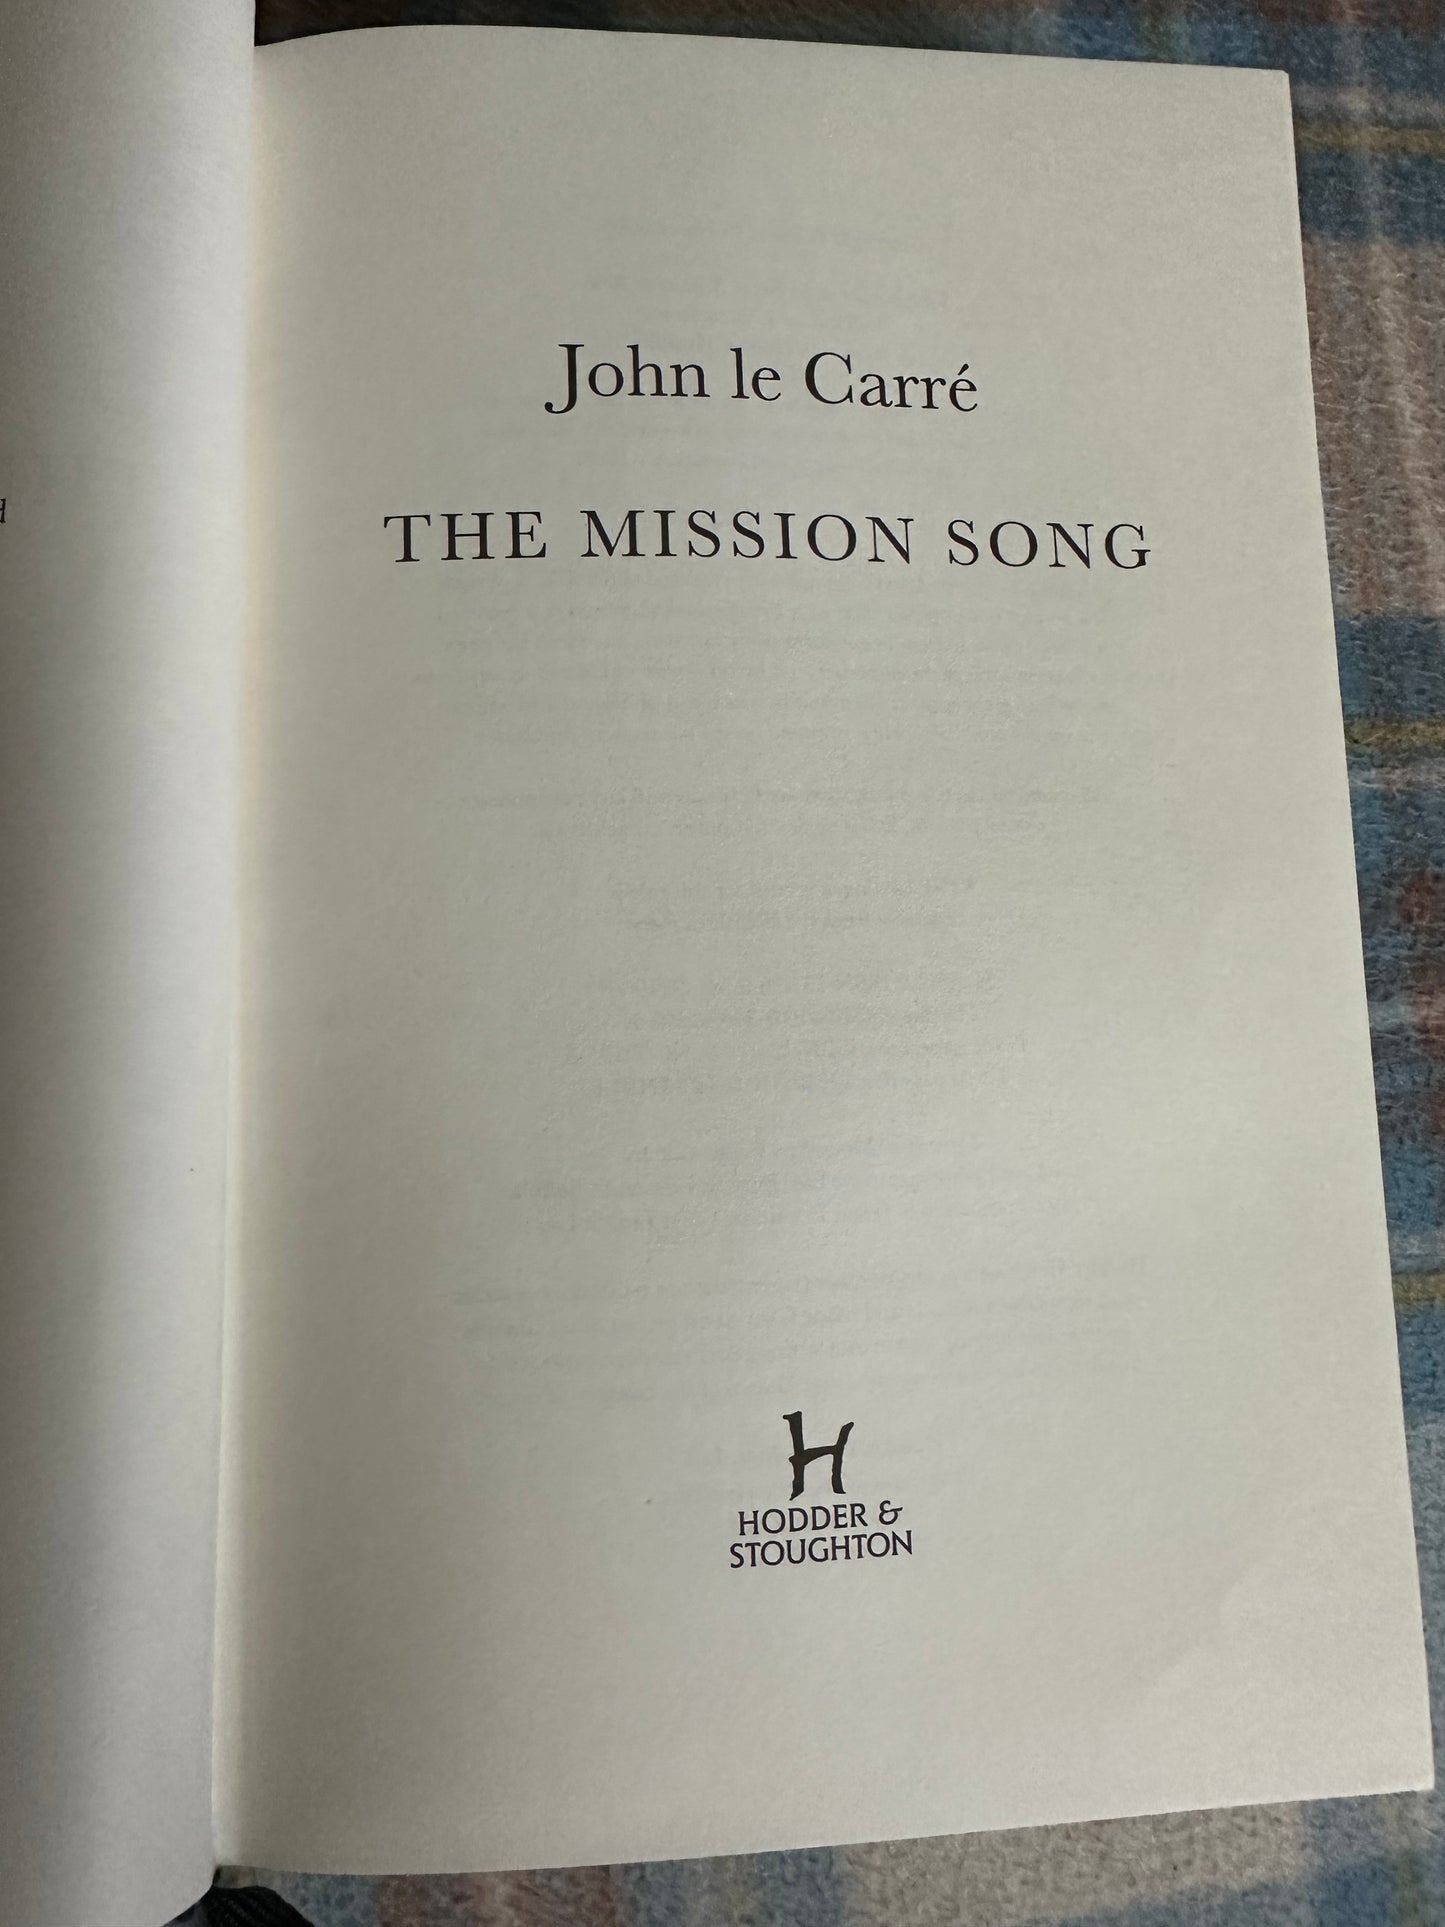 2006*1st* The Mission Song - John Le Carré(Hodder and Stoughton)